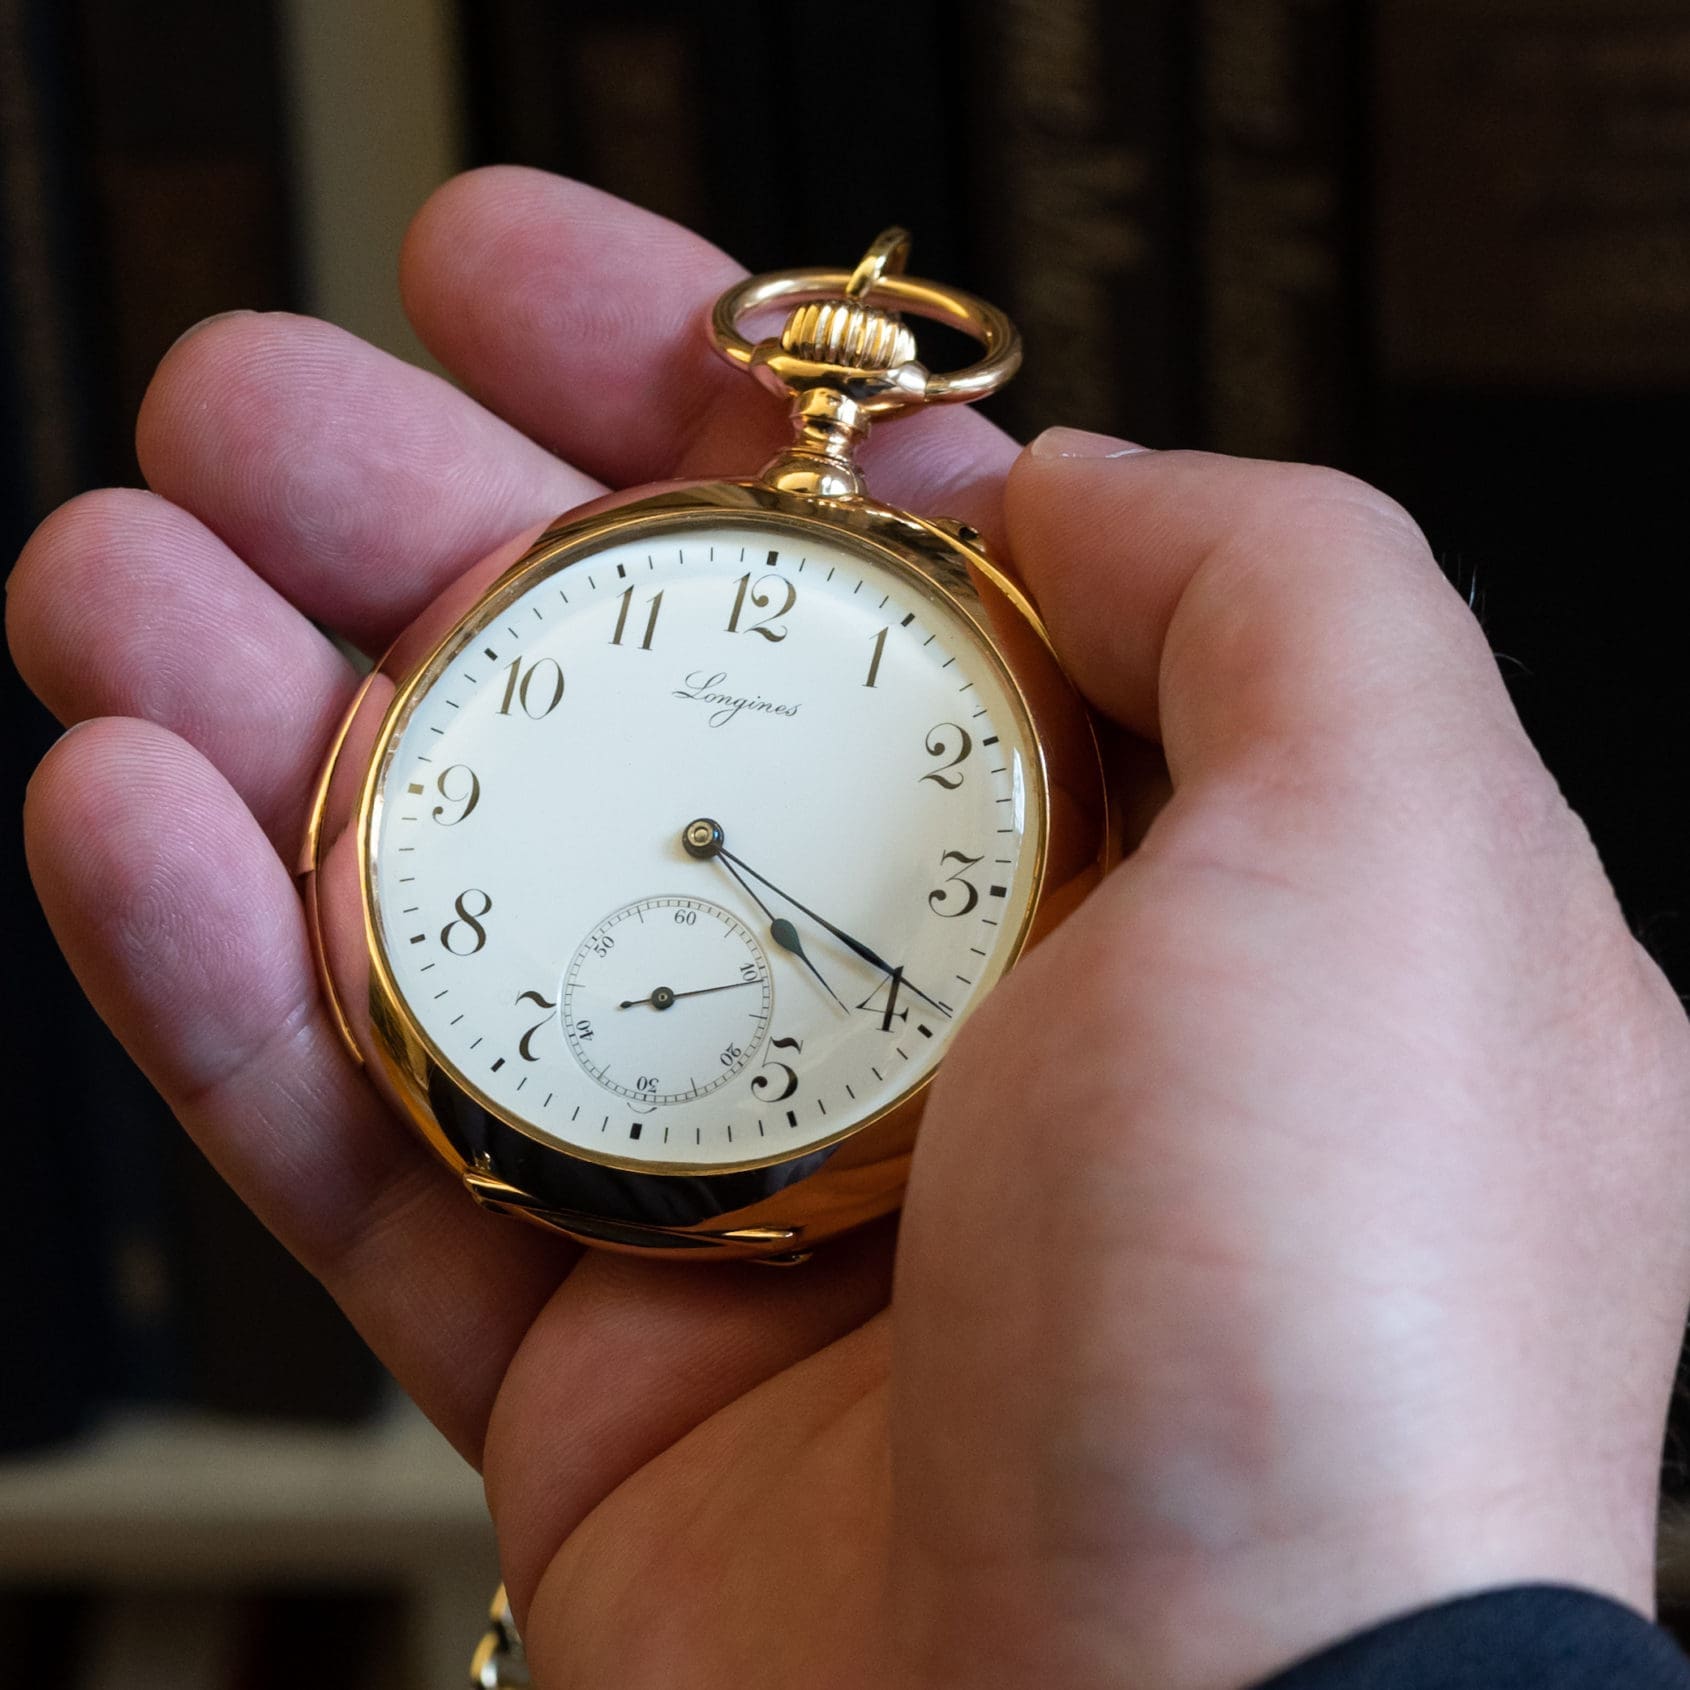 What is it really like to wear a pocket watch in the 21st century?